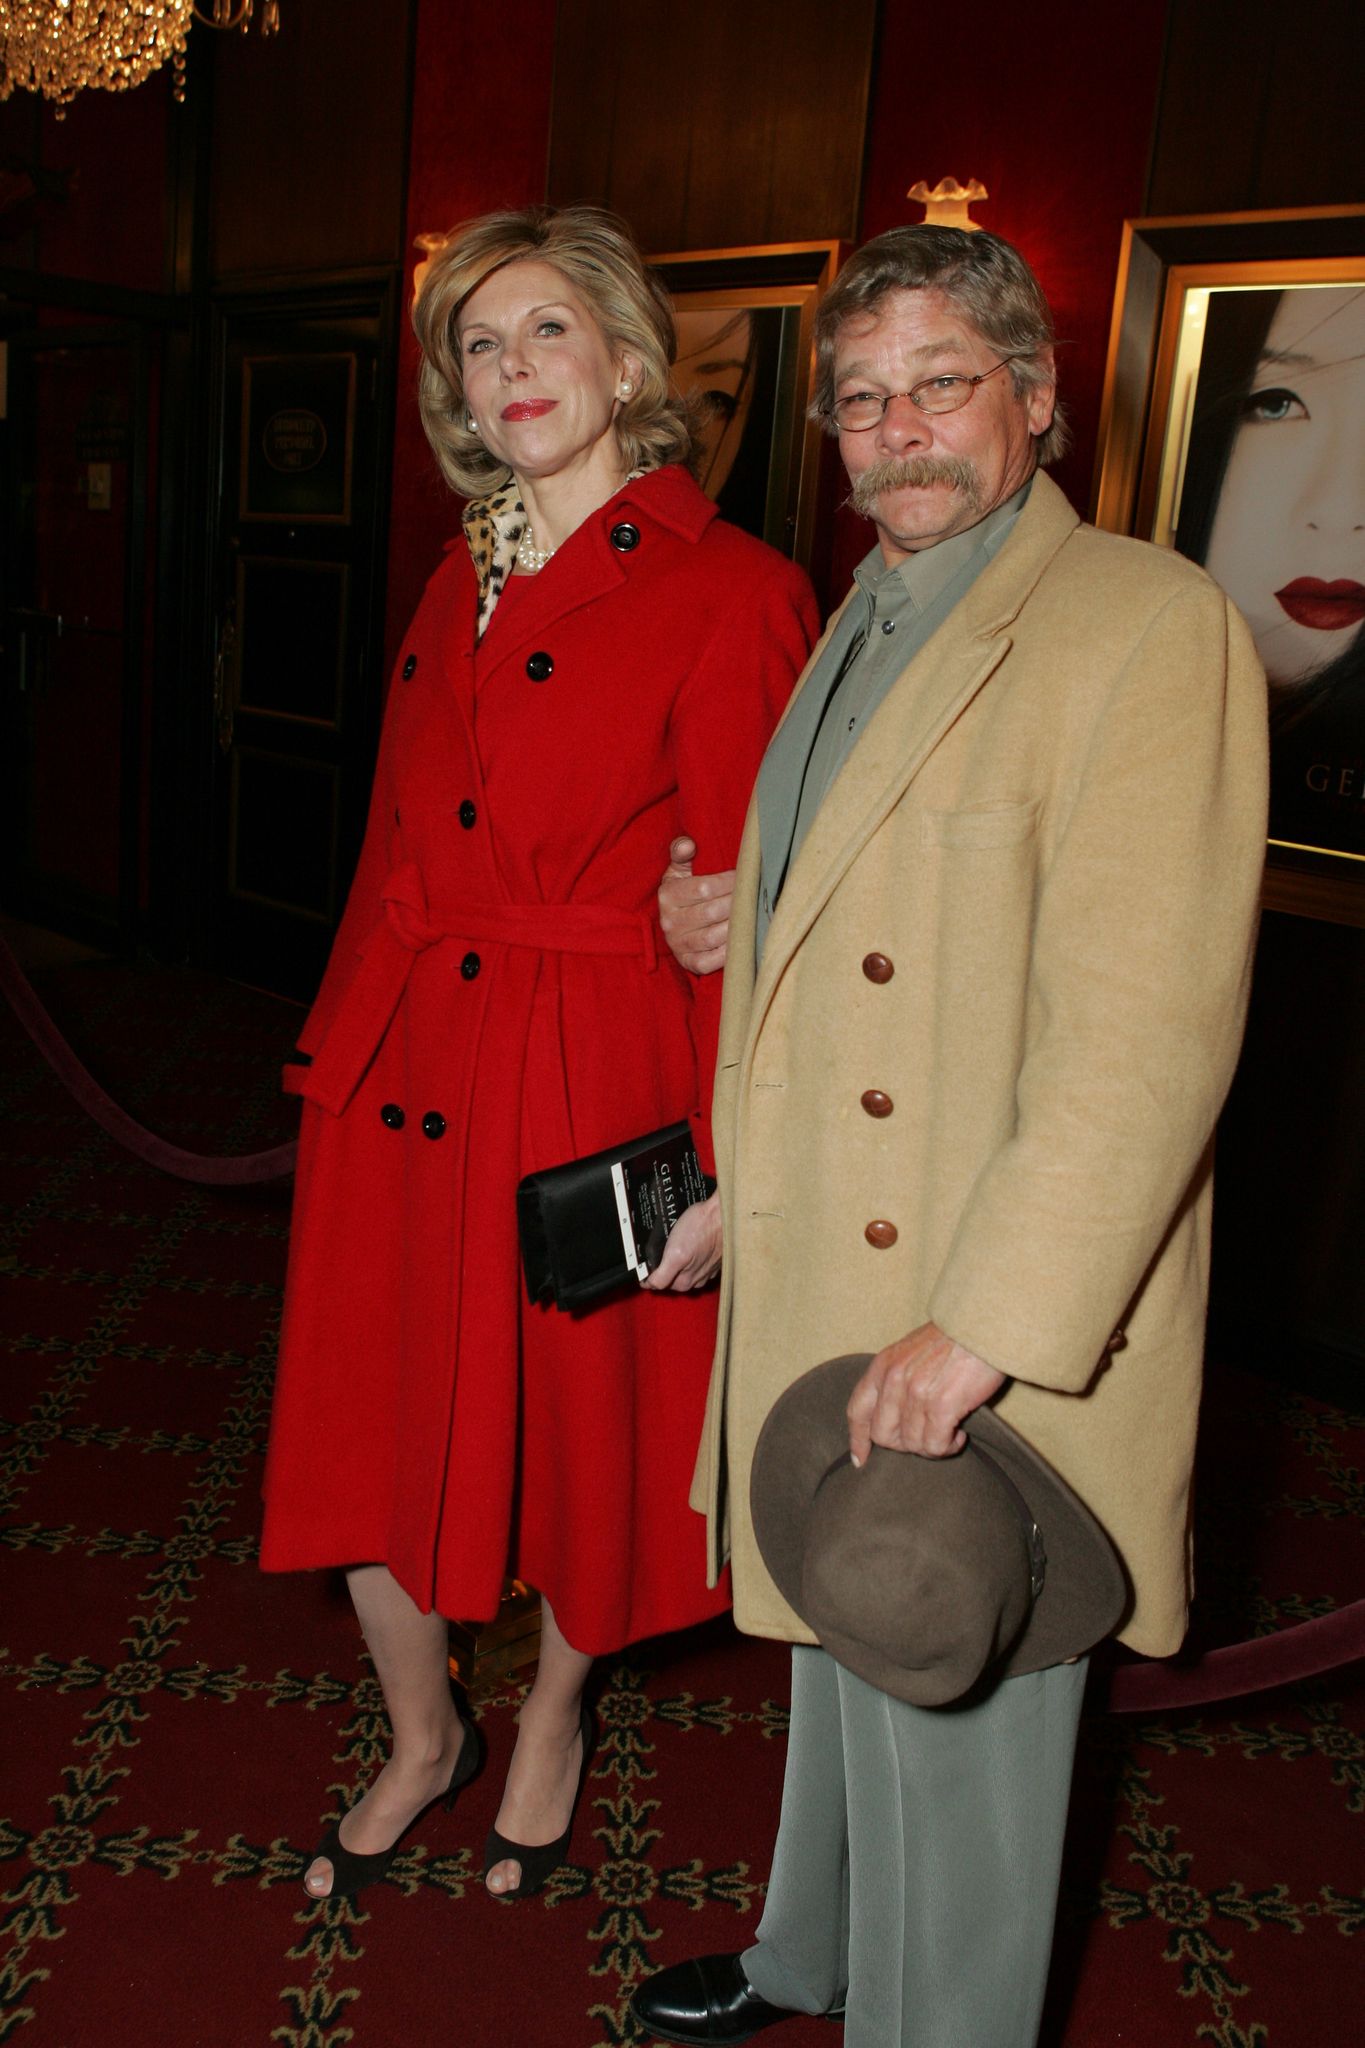 Christine Baranski and Matthew Cowles at the premiere of "Memoirs of a Geisha" in 2005 in New York | Source: Getty Images